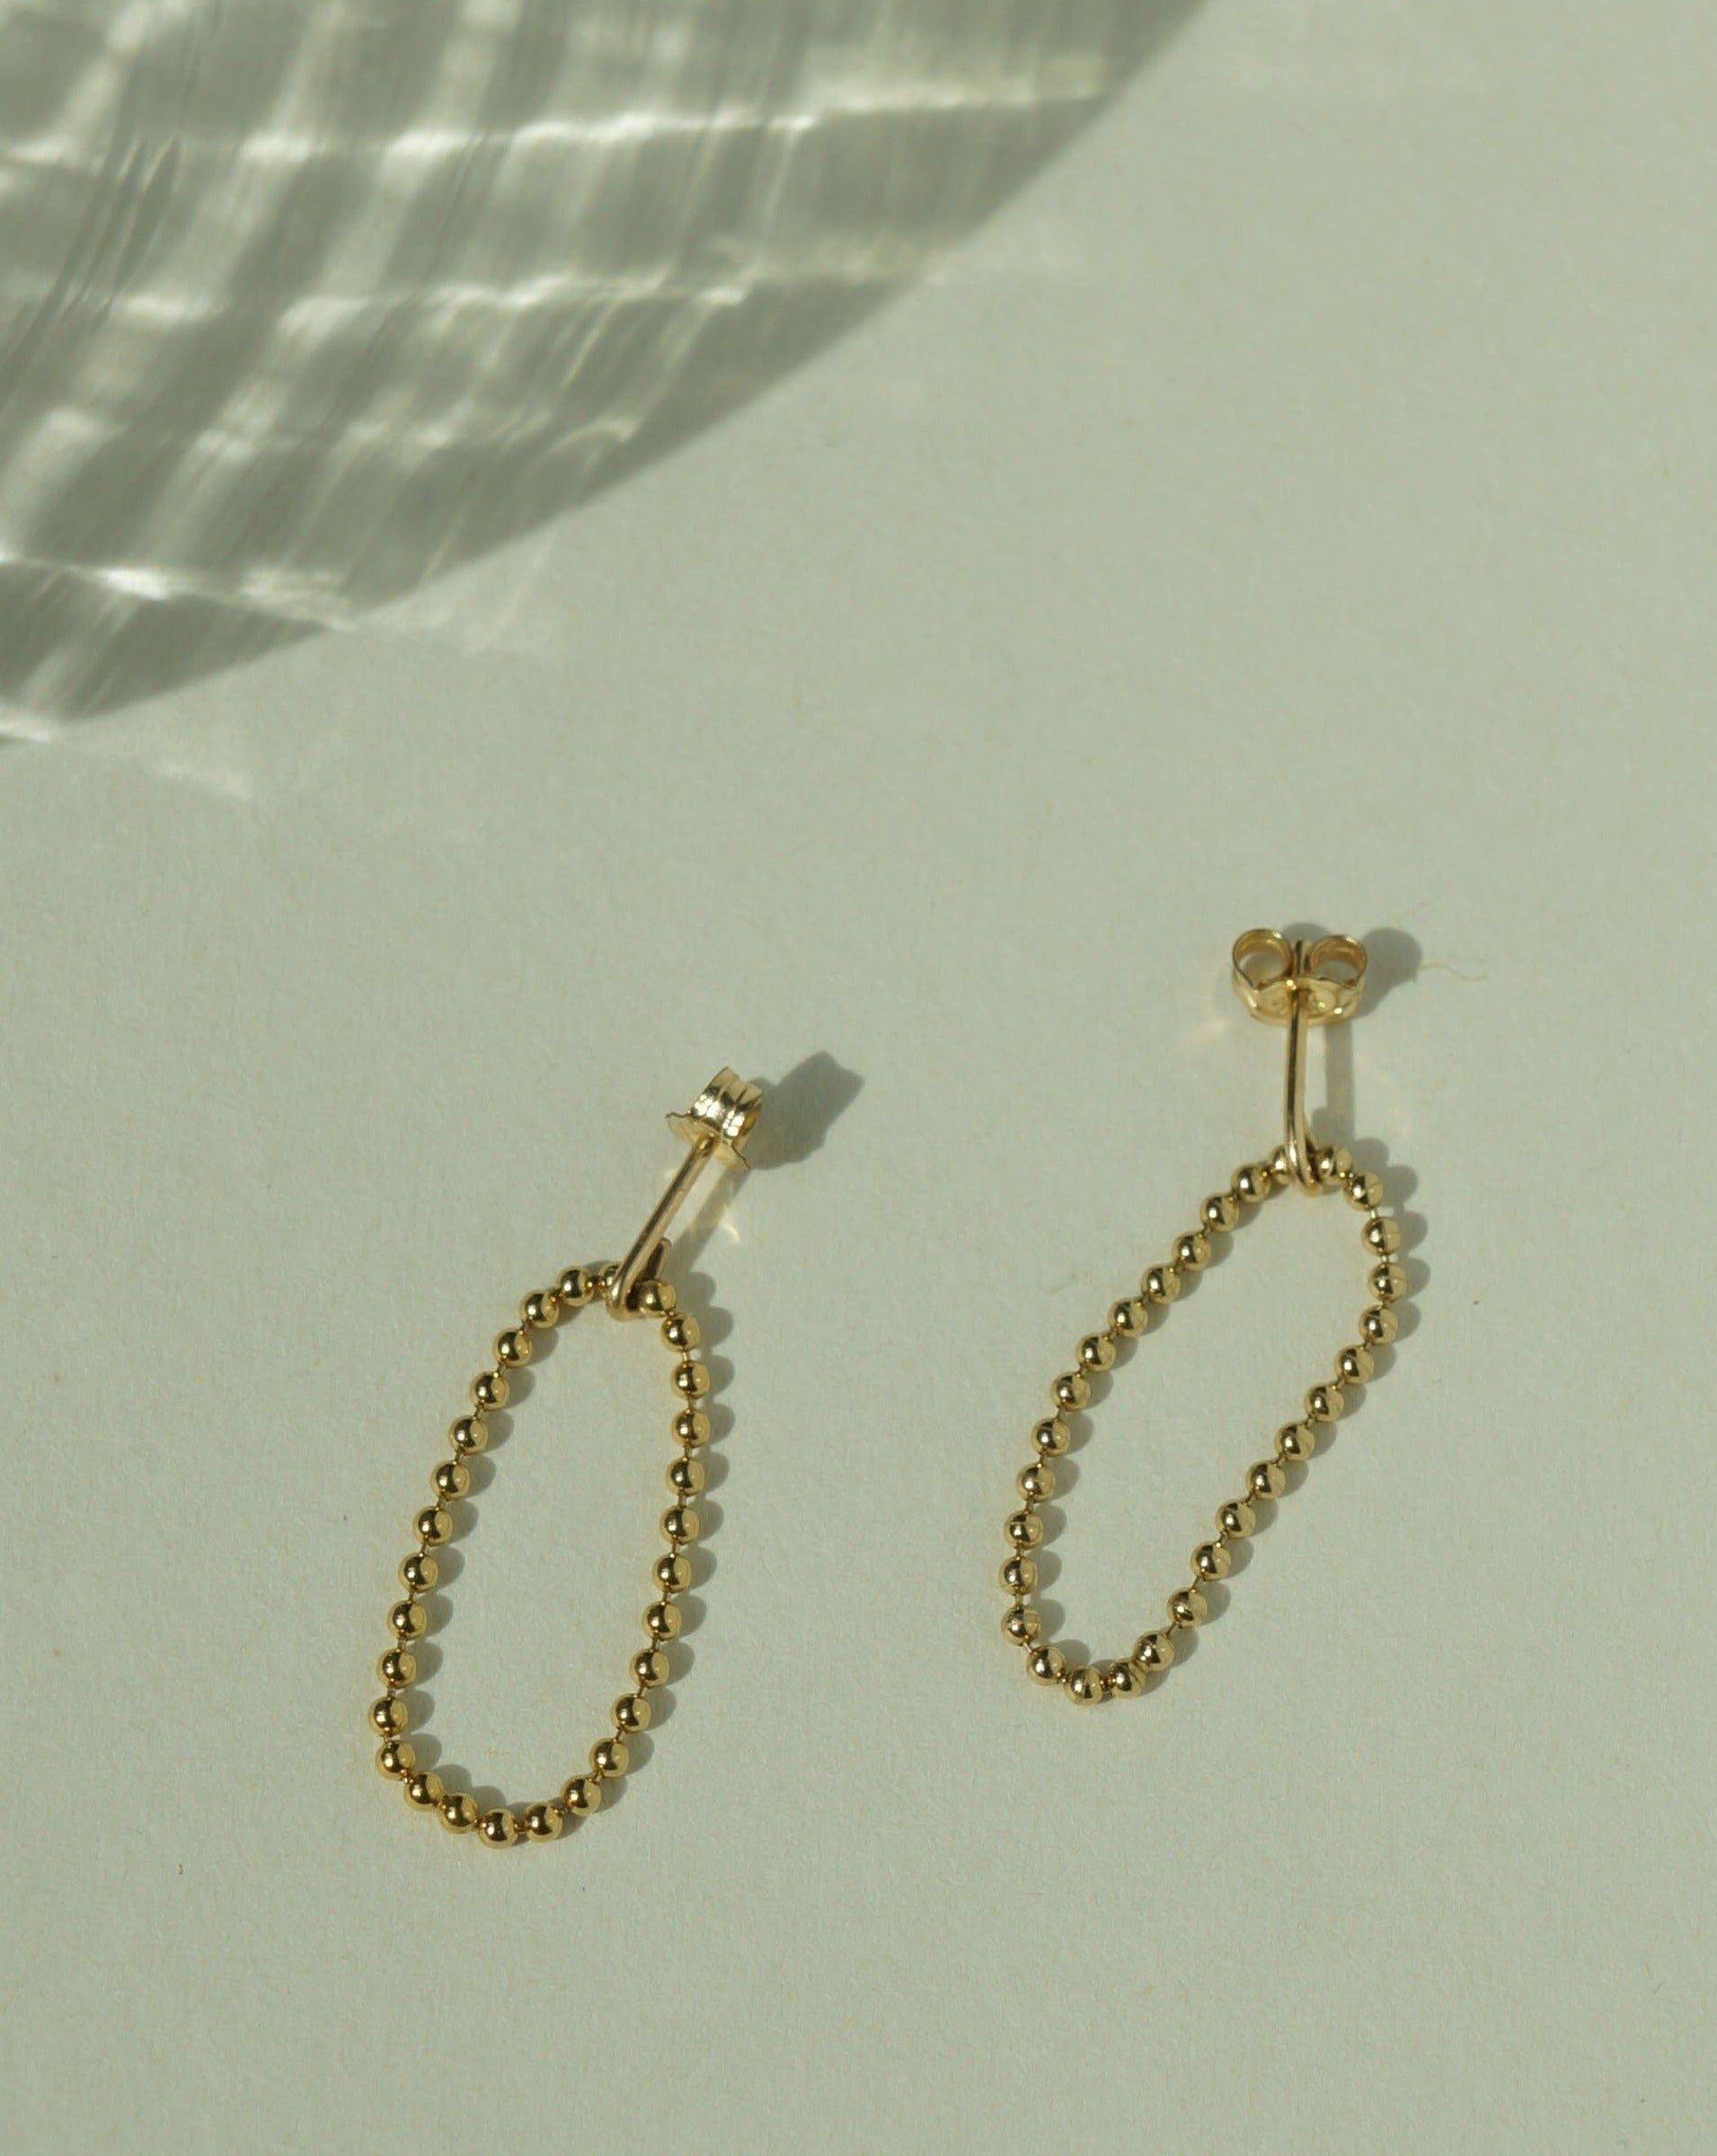 Lata Earrings by KOZAKH. 14K Gold Filled drop style stud earrings, with drop length of 1 inch, featuring linked gold balls.